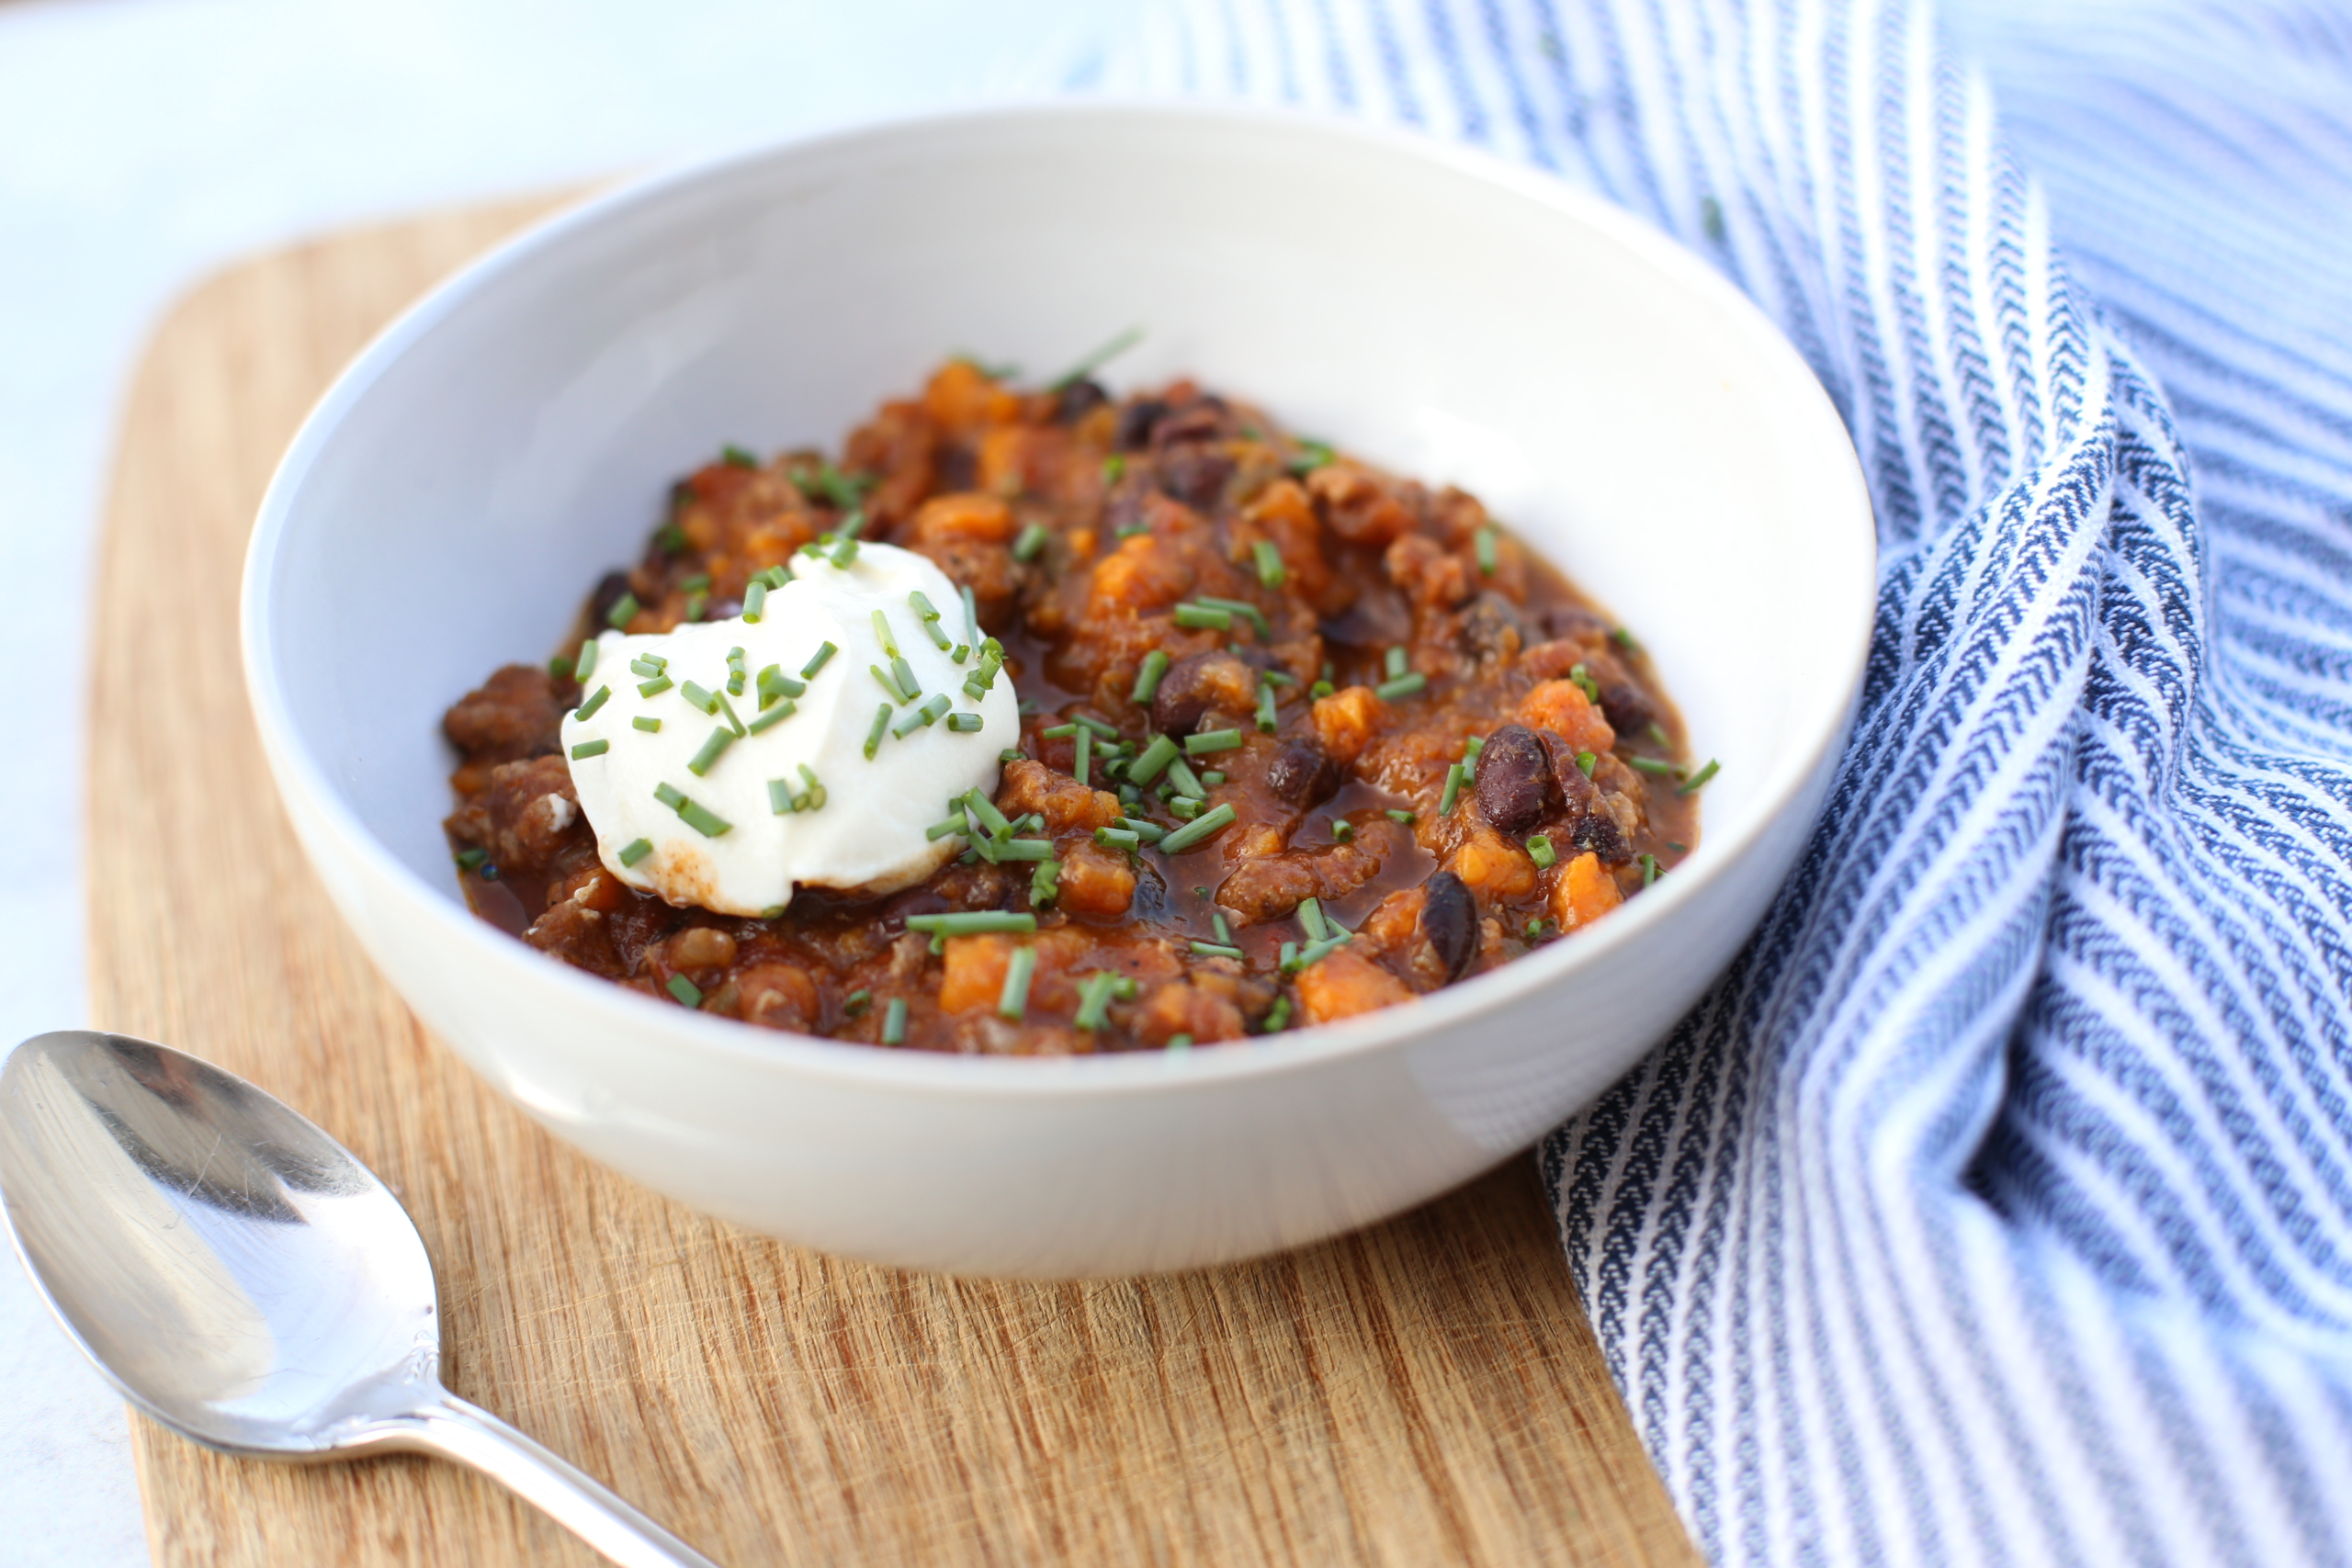 Slow cooker turkey chili with sweet potato and black beans served in a white bowl with a dollop of sour cream.